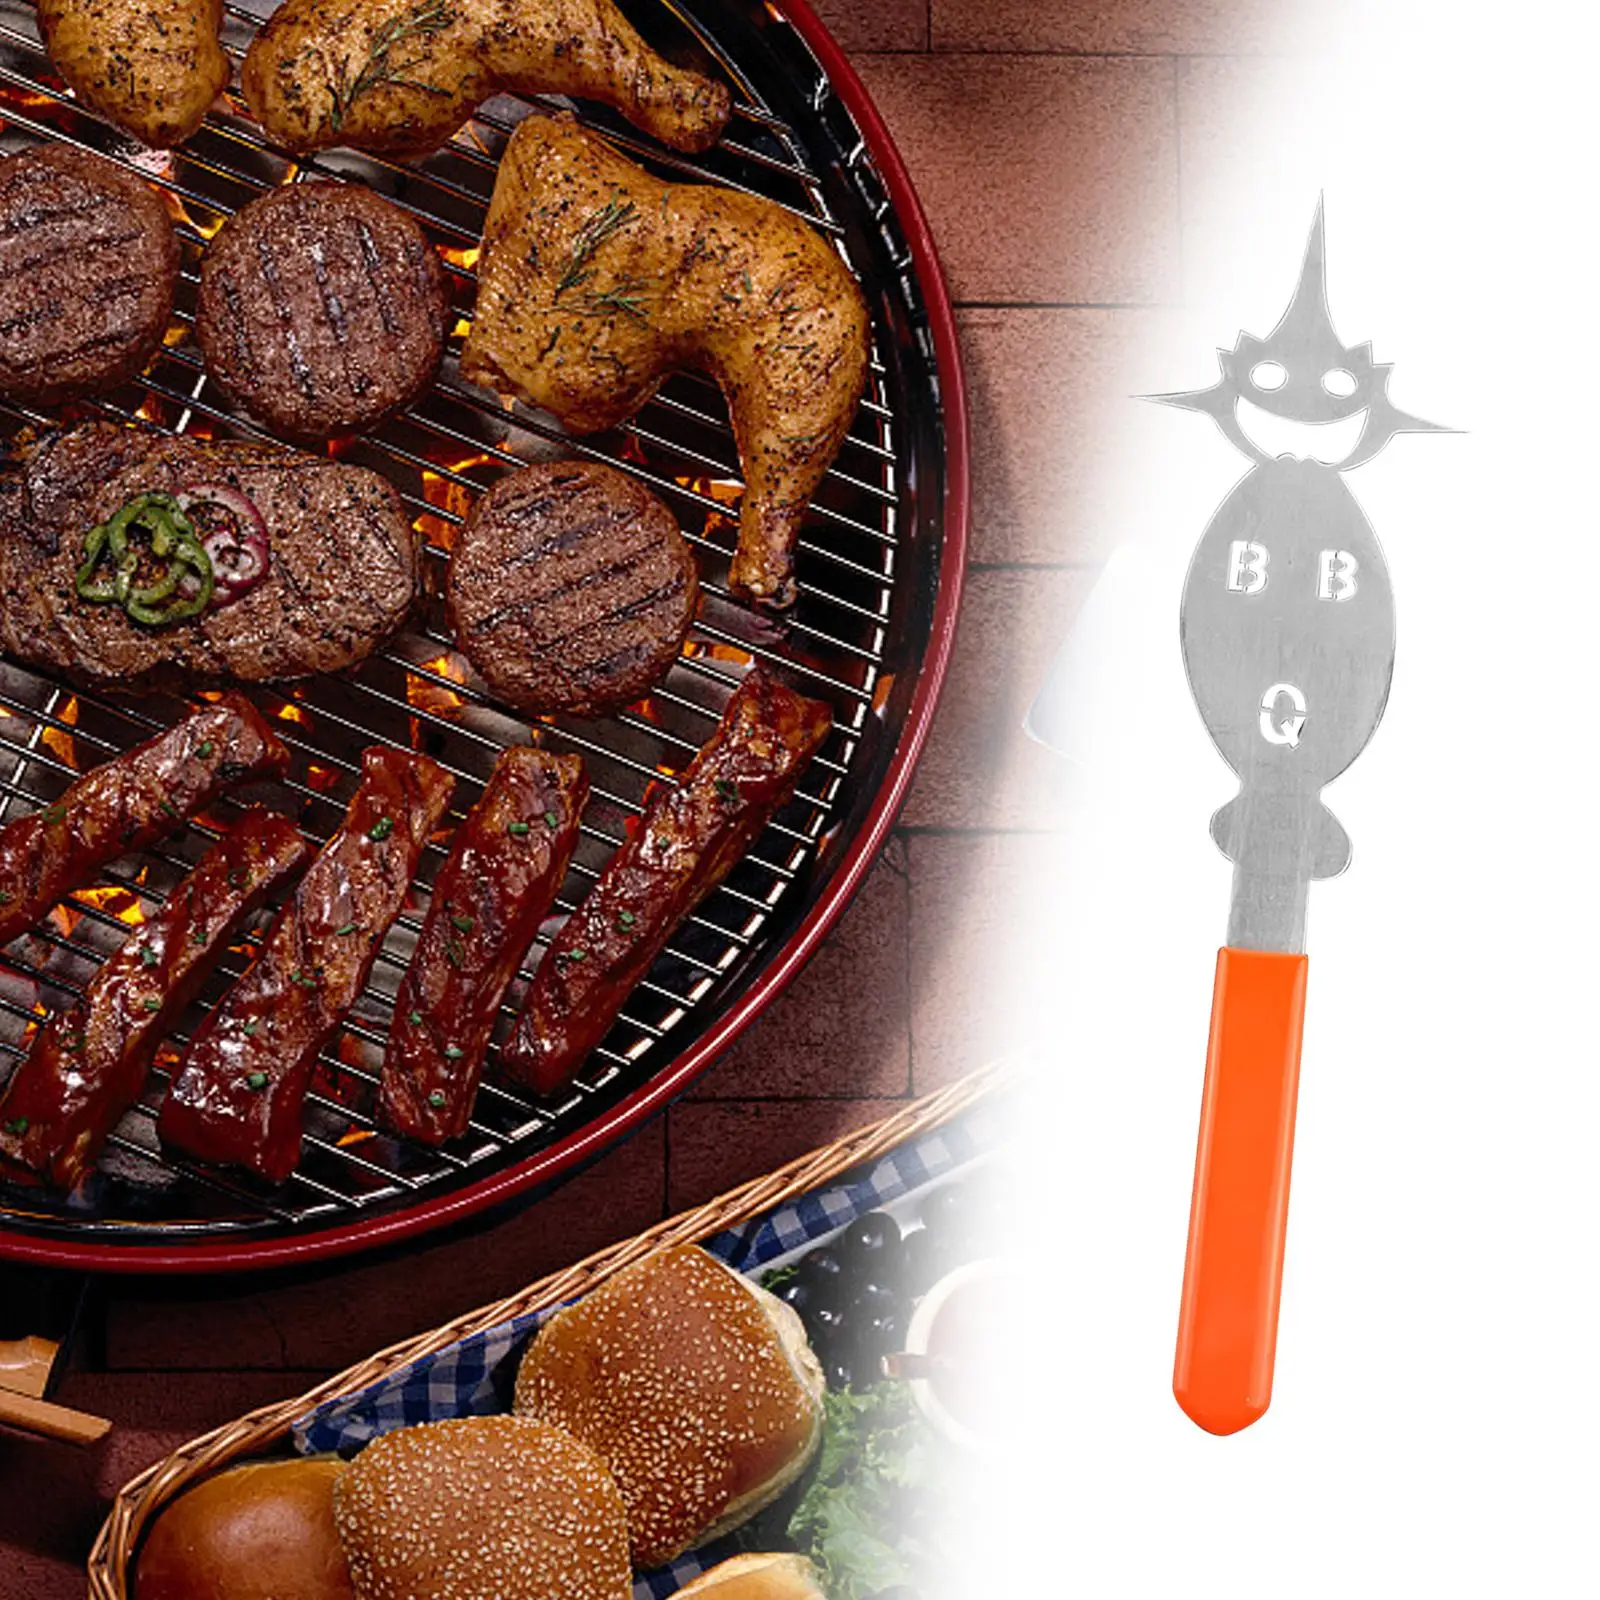 Barbecue Fork Grill Tools Portable Multipurpose Reusable Kitchen Supplies bbq Accessories for Home BBQ Cooking Meat Sausages